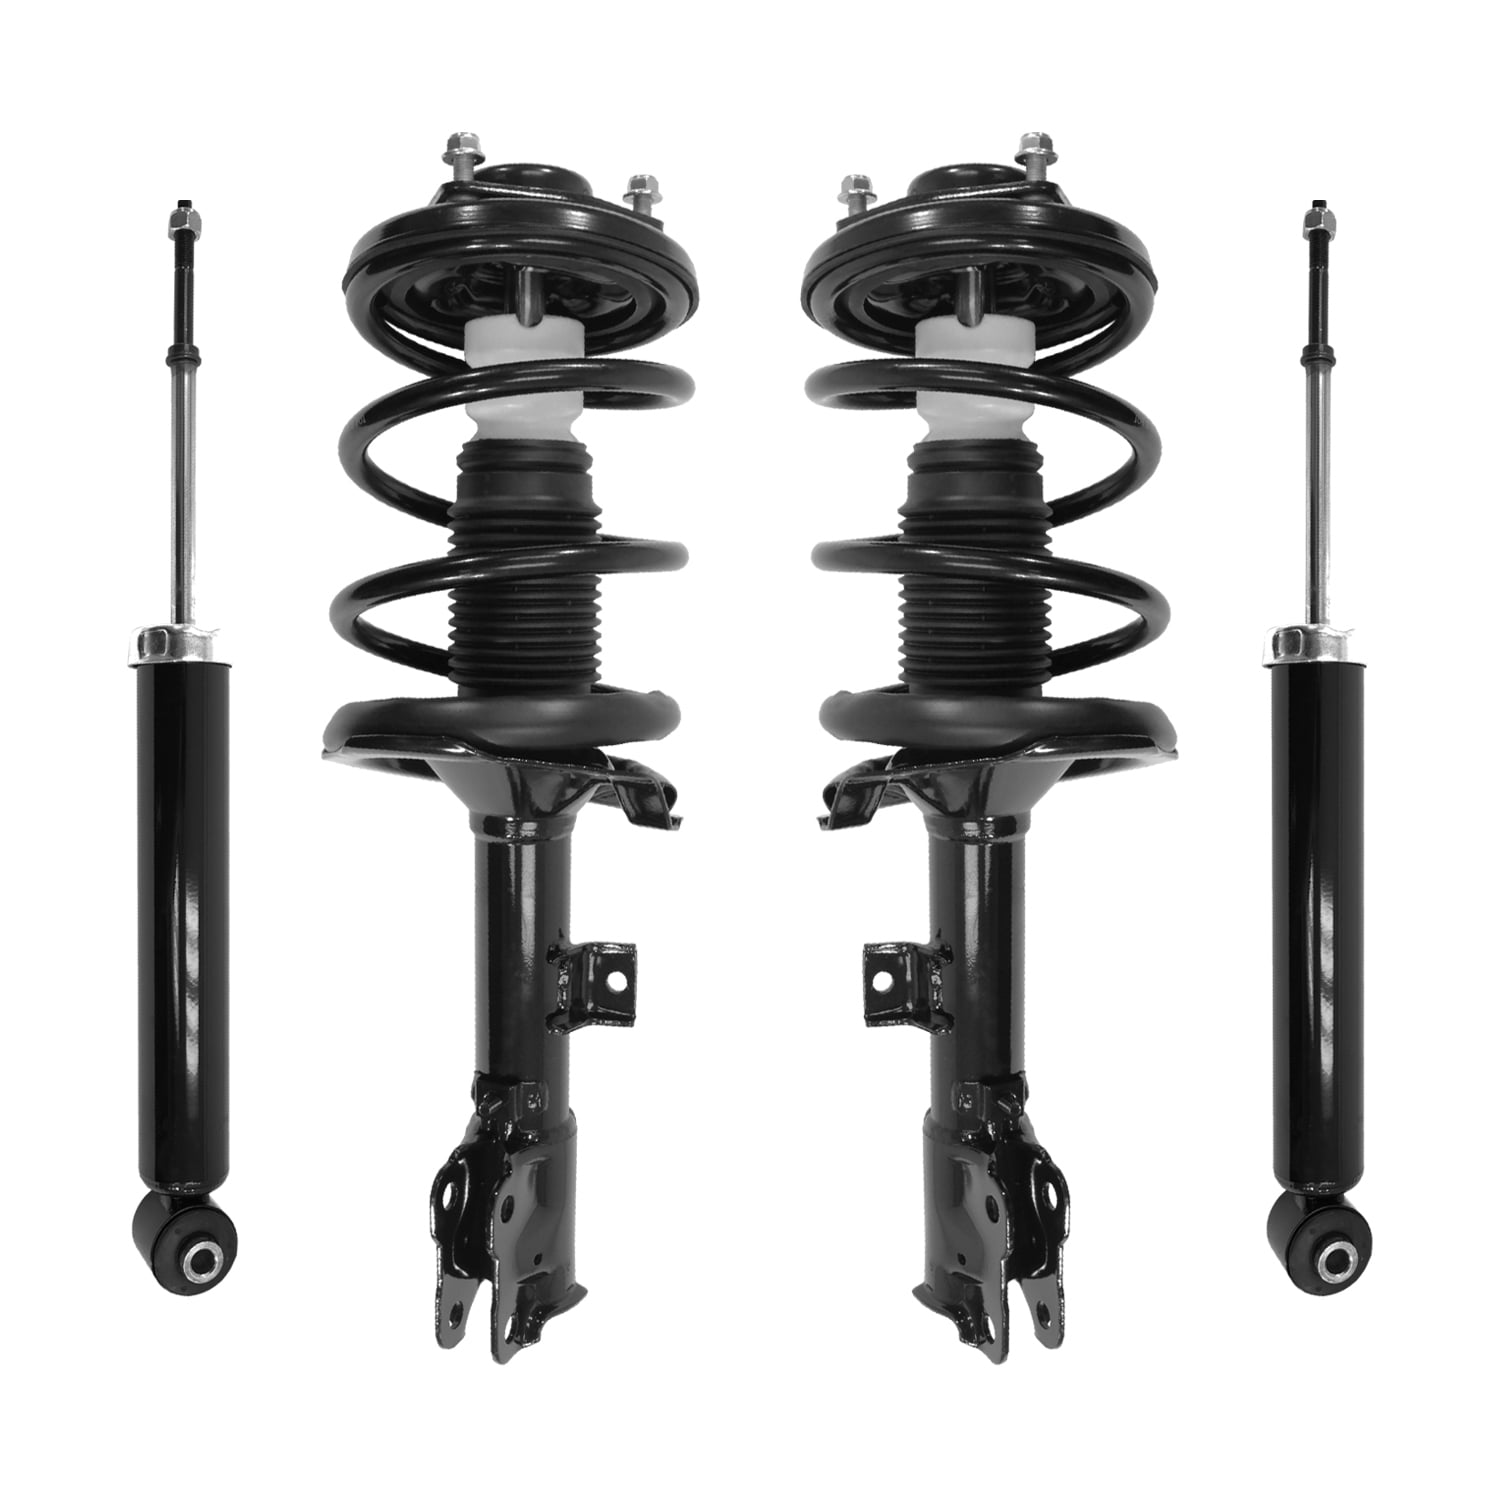 Focus Auto Parts Shock Absorber Front Rear Set Of 4 For Dodge Ram 1500 2002-2005